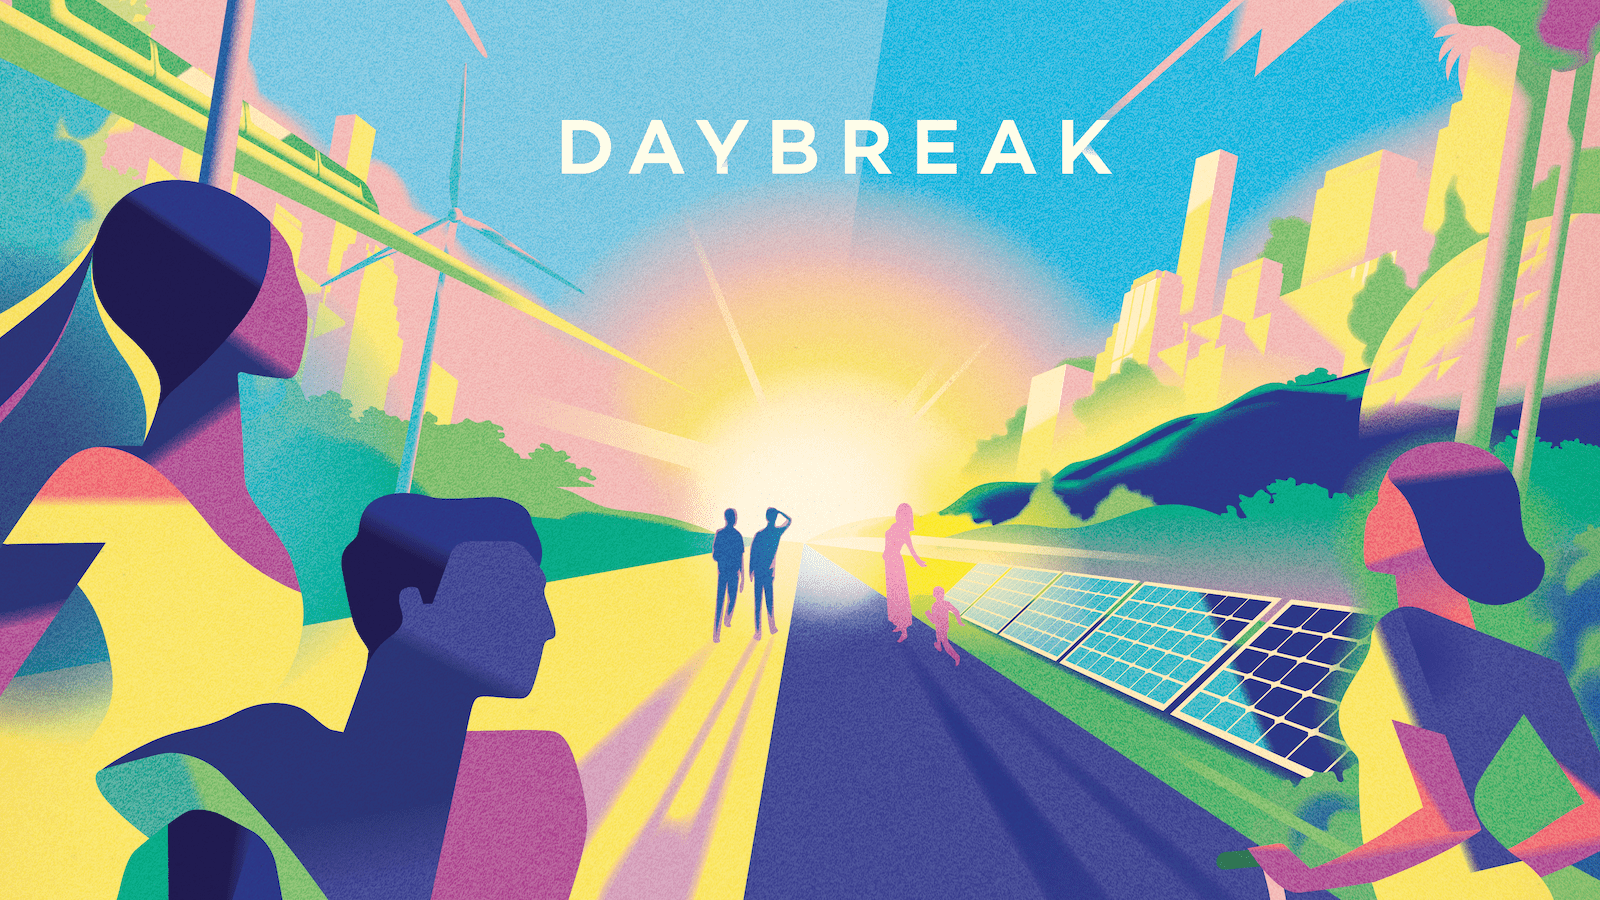 Daybreak cover art by Mads Berg